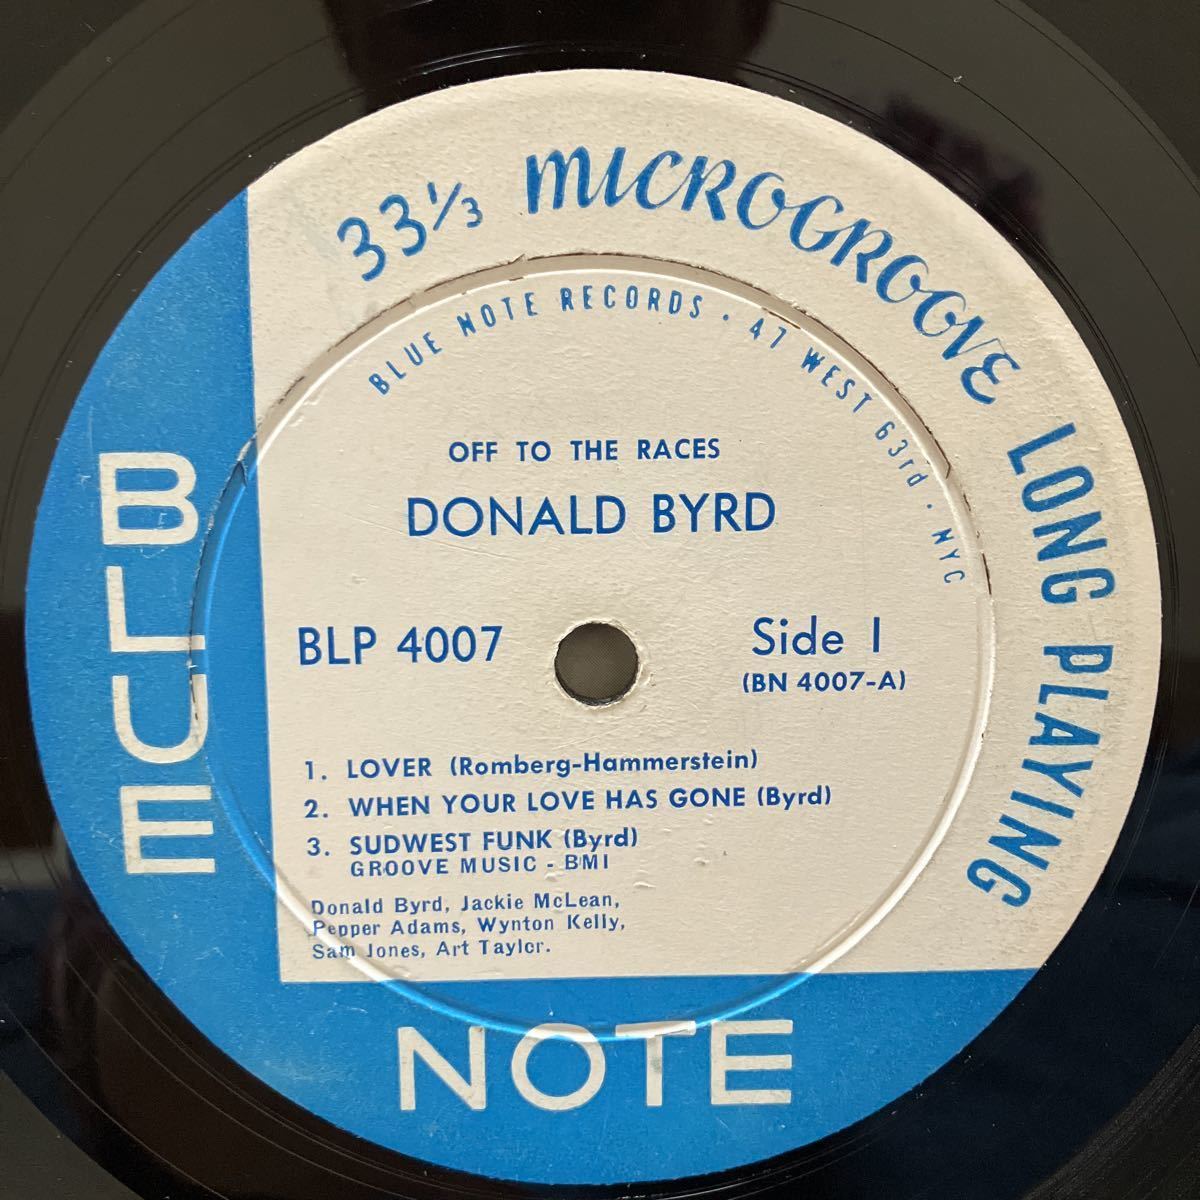 【LP】オリジ★ドナルド・バード / DONALD BYRD /オフ・トゥ・ザ・レイシズ/ OFF TO THE RACES / US盤 / BLUE NOTE BLP 4007 RVG_画像4